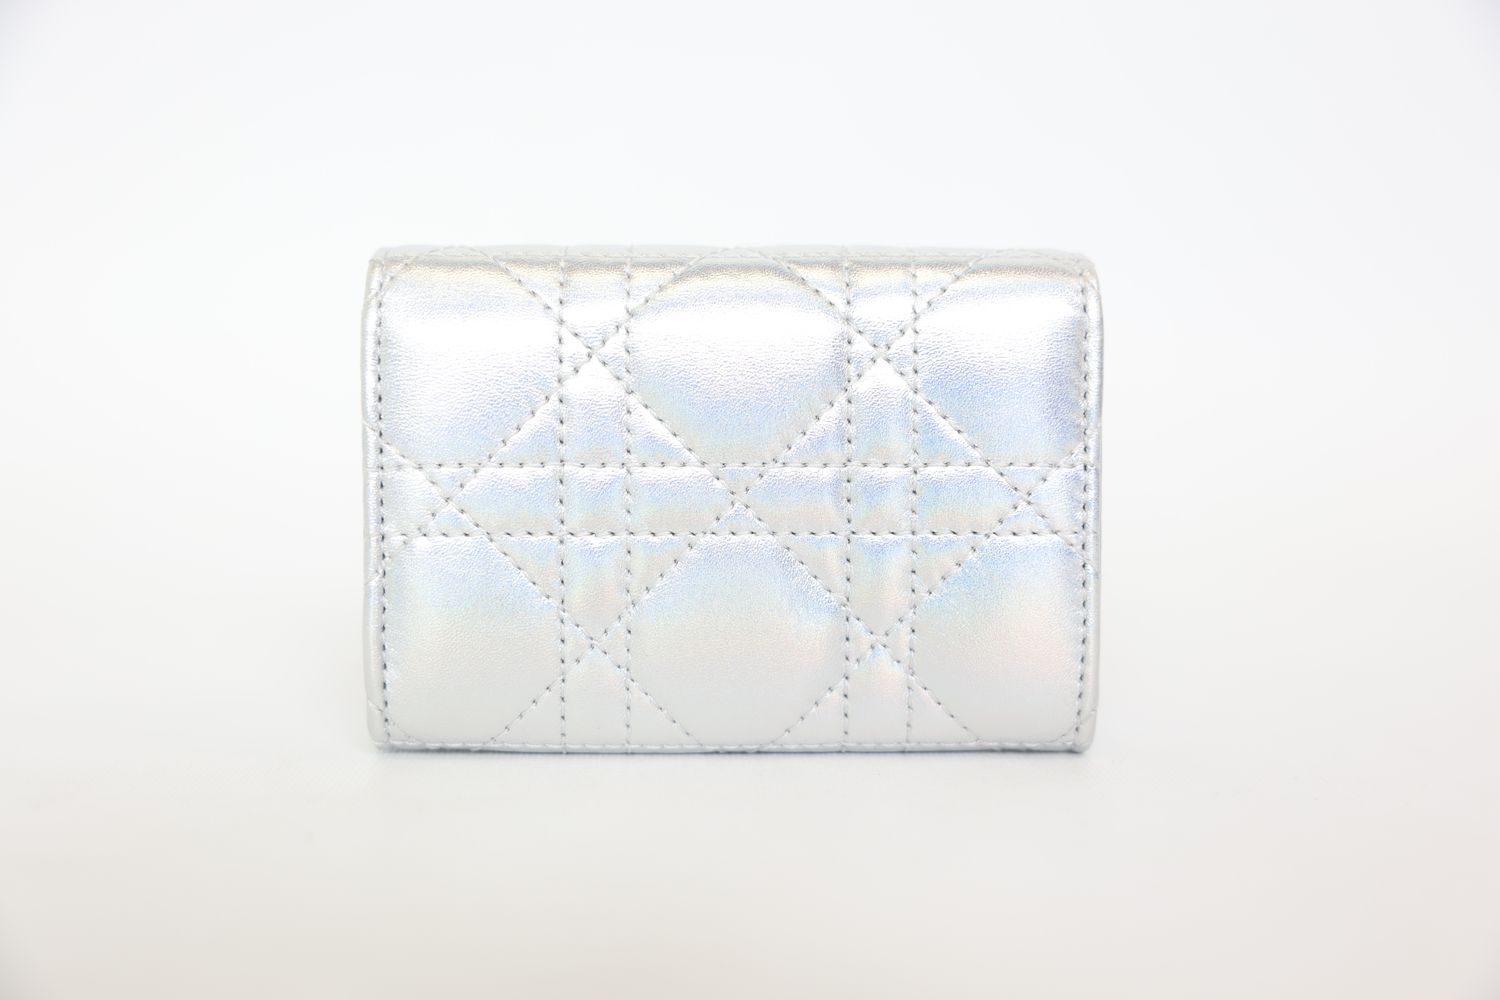 Christian Dior Cannage Wallet, Silver Metallic Grained Calfskin, Preowned in Dustbag WA001